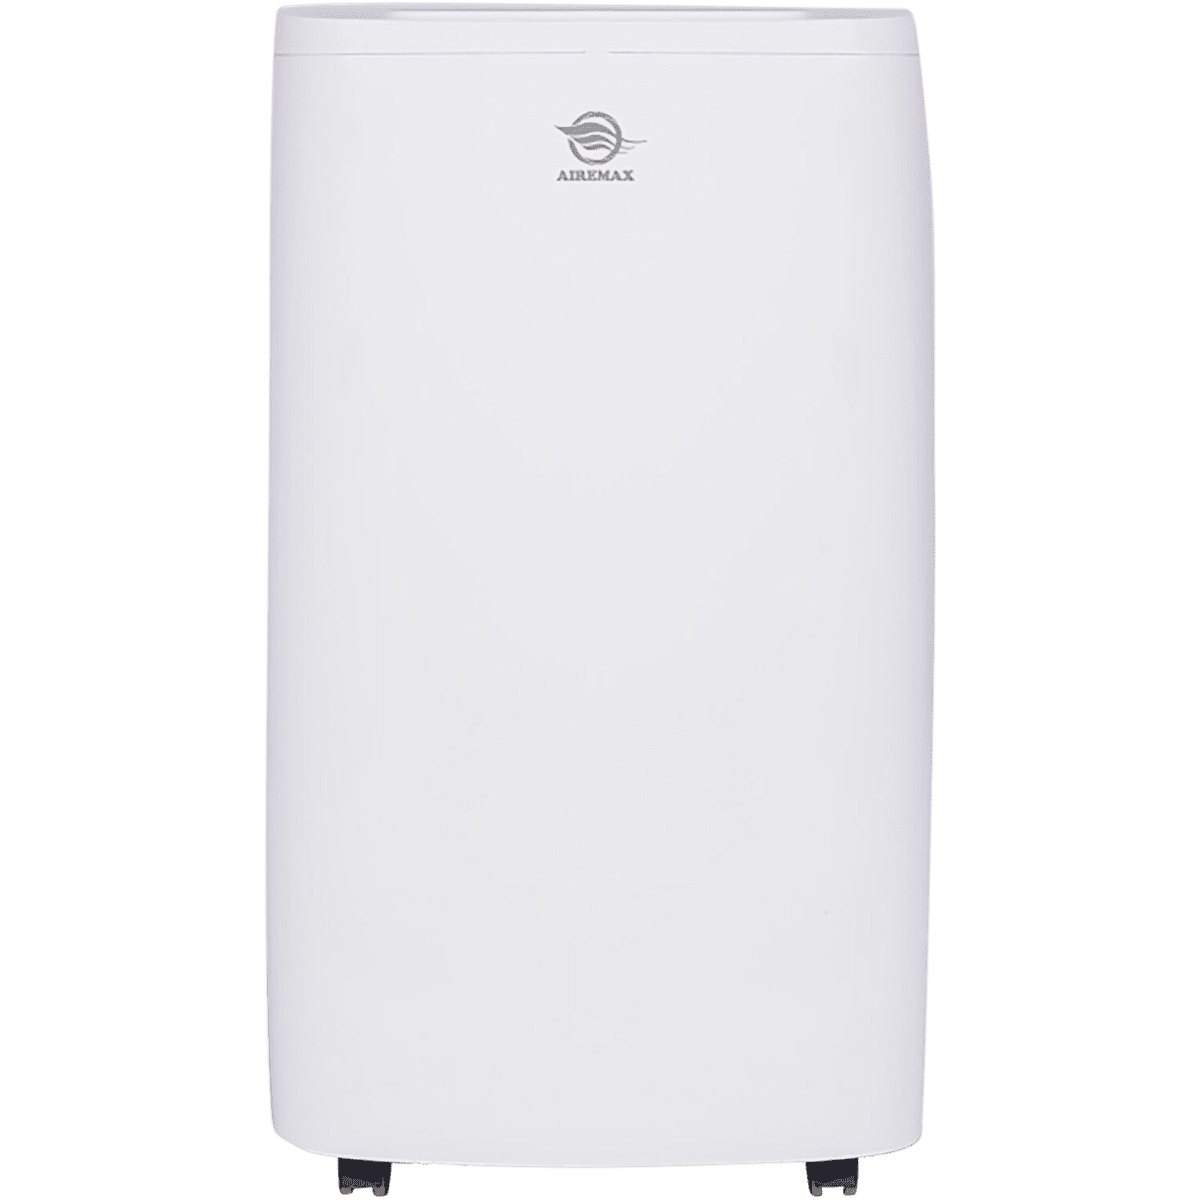 https://s3-assets.sylvane.com/media/images/products/airemax-aph10ch-10000-btu-portable-air-conditioner-main.png